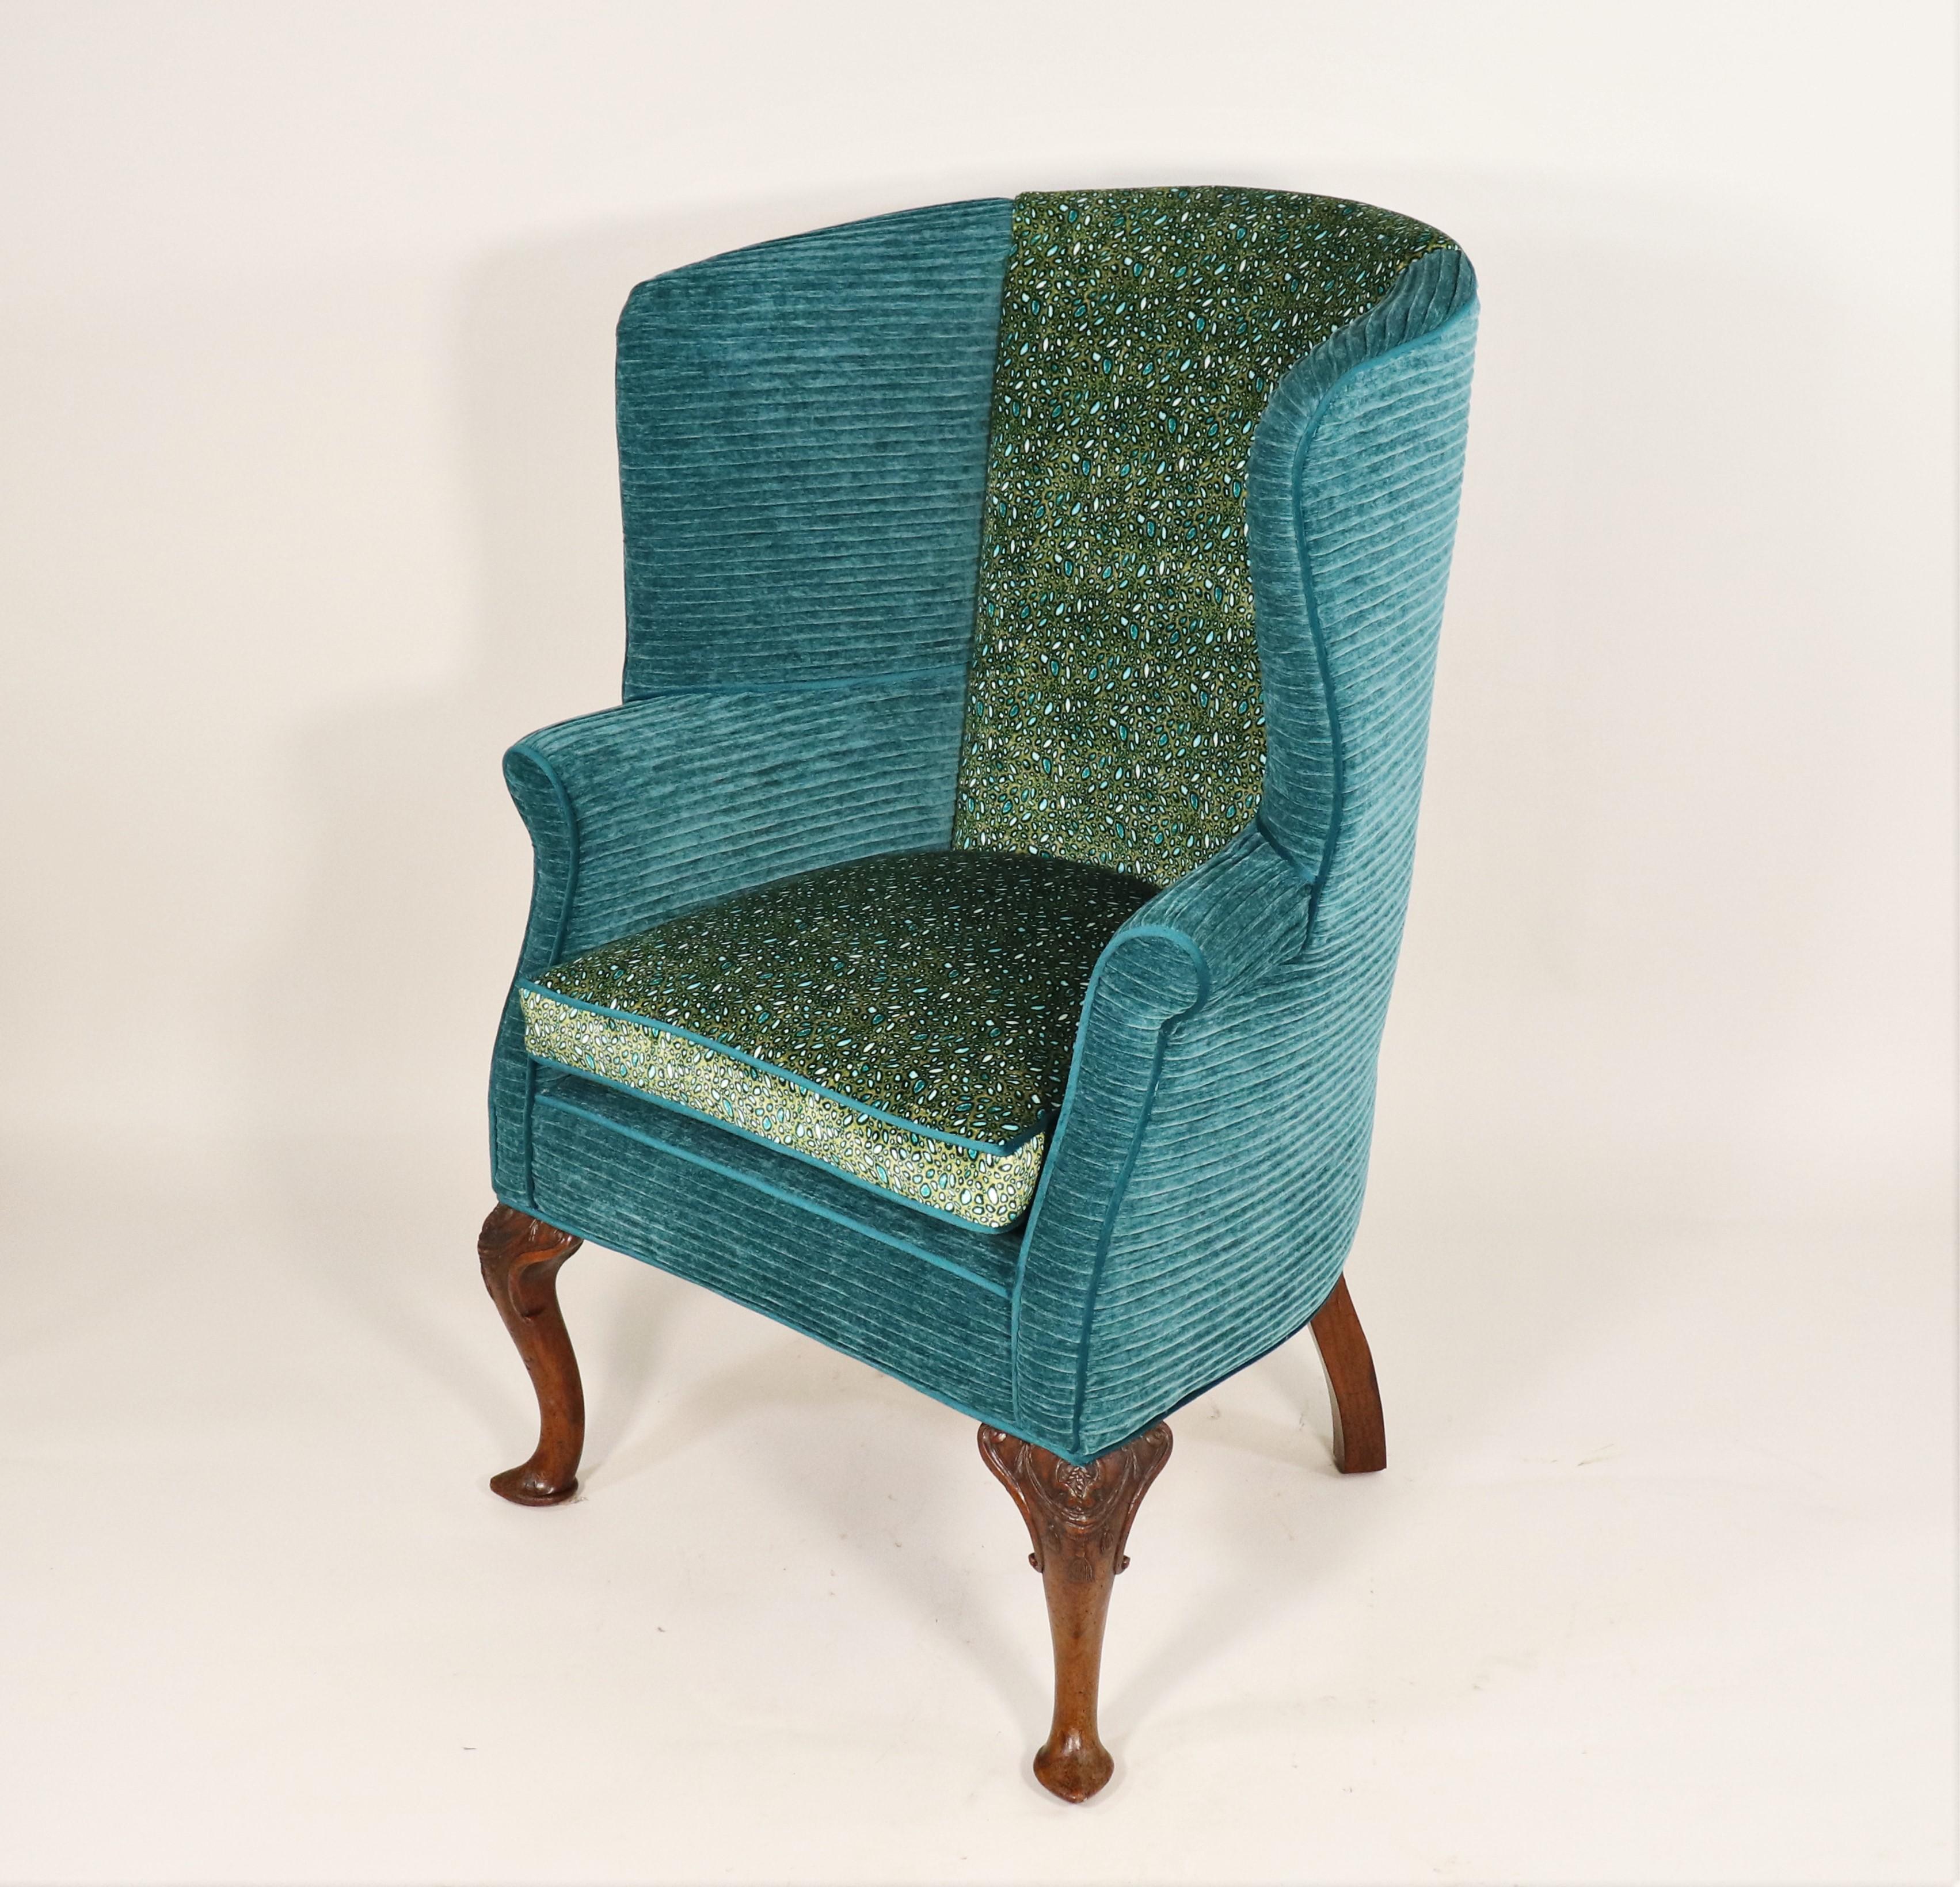 This is an excellent 18th-century English Chippendale-style wingback chair. The wingback armchair was designed to be sat in front of a fireplace. The unique ‘wings’ prevented drafts of wind from slicing through while also trapping the heat from the